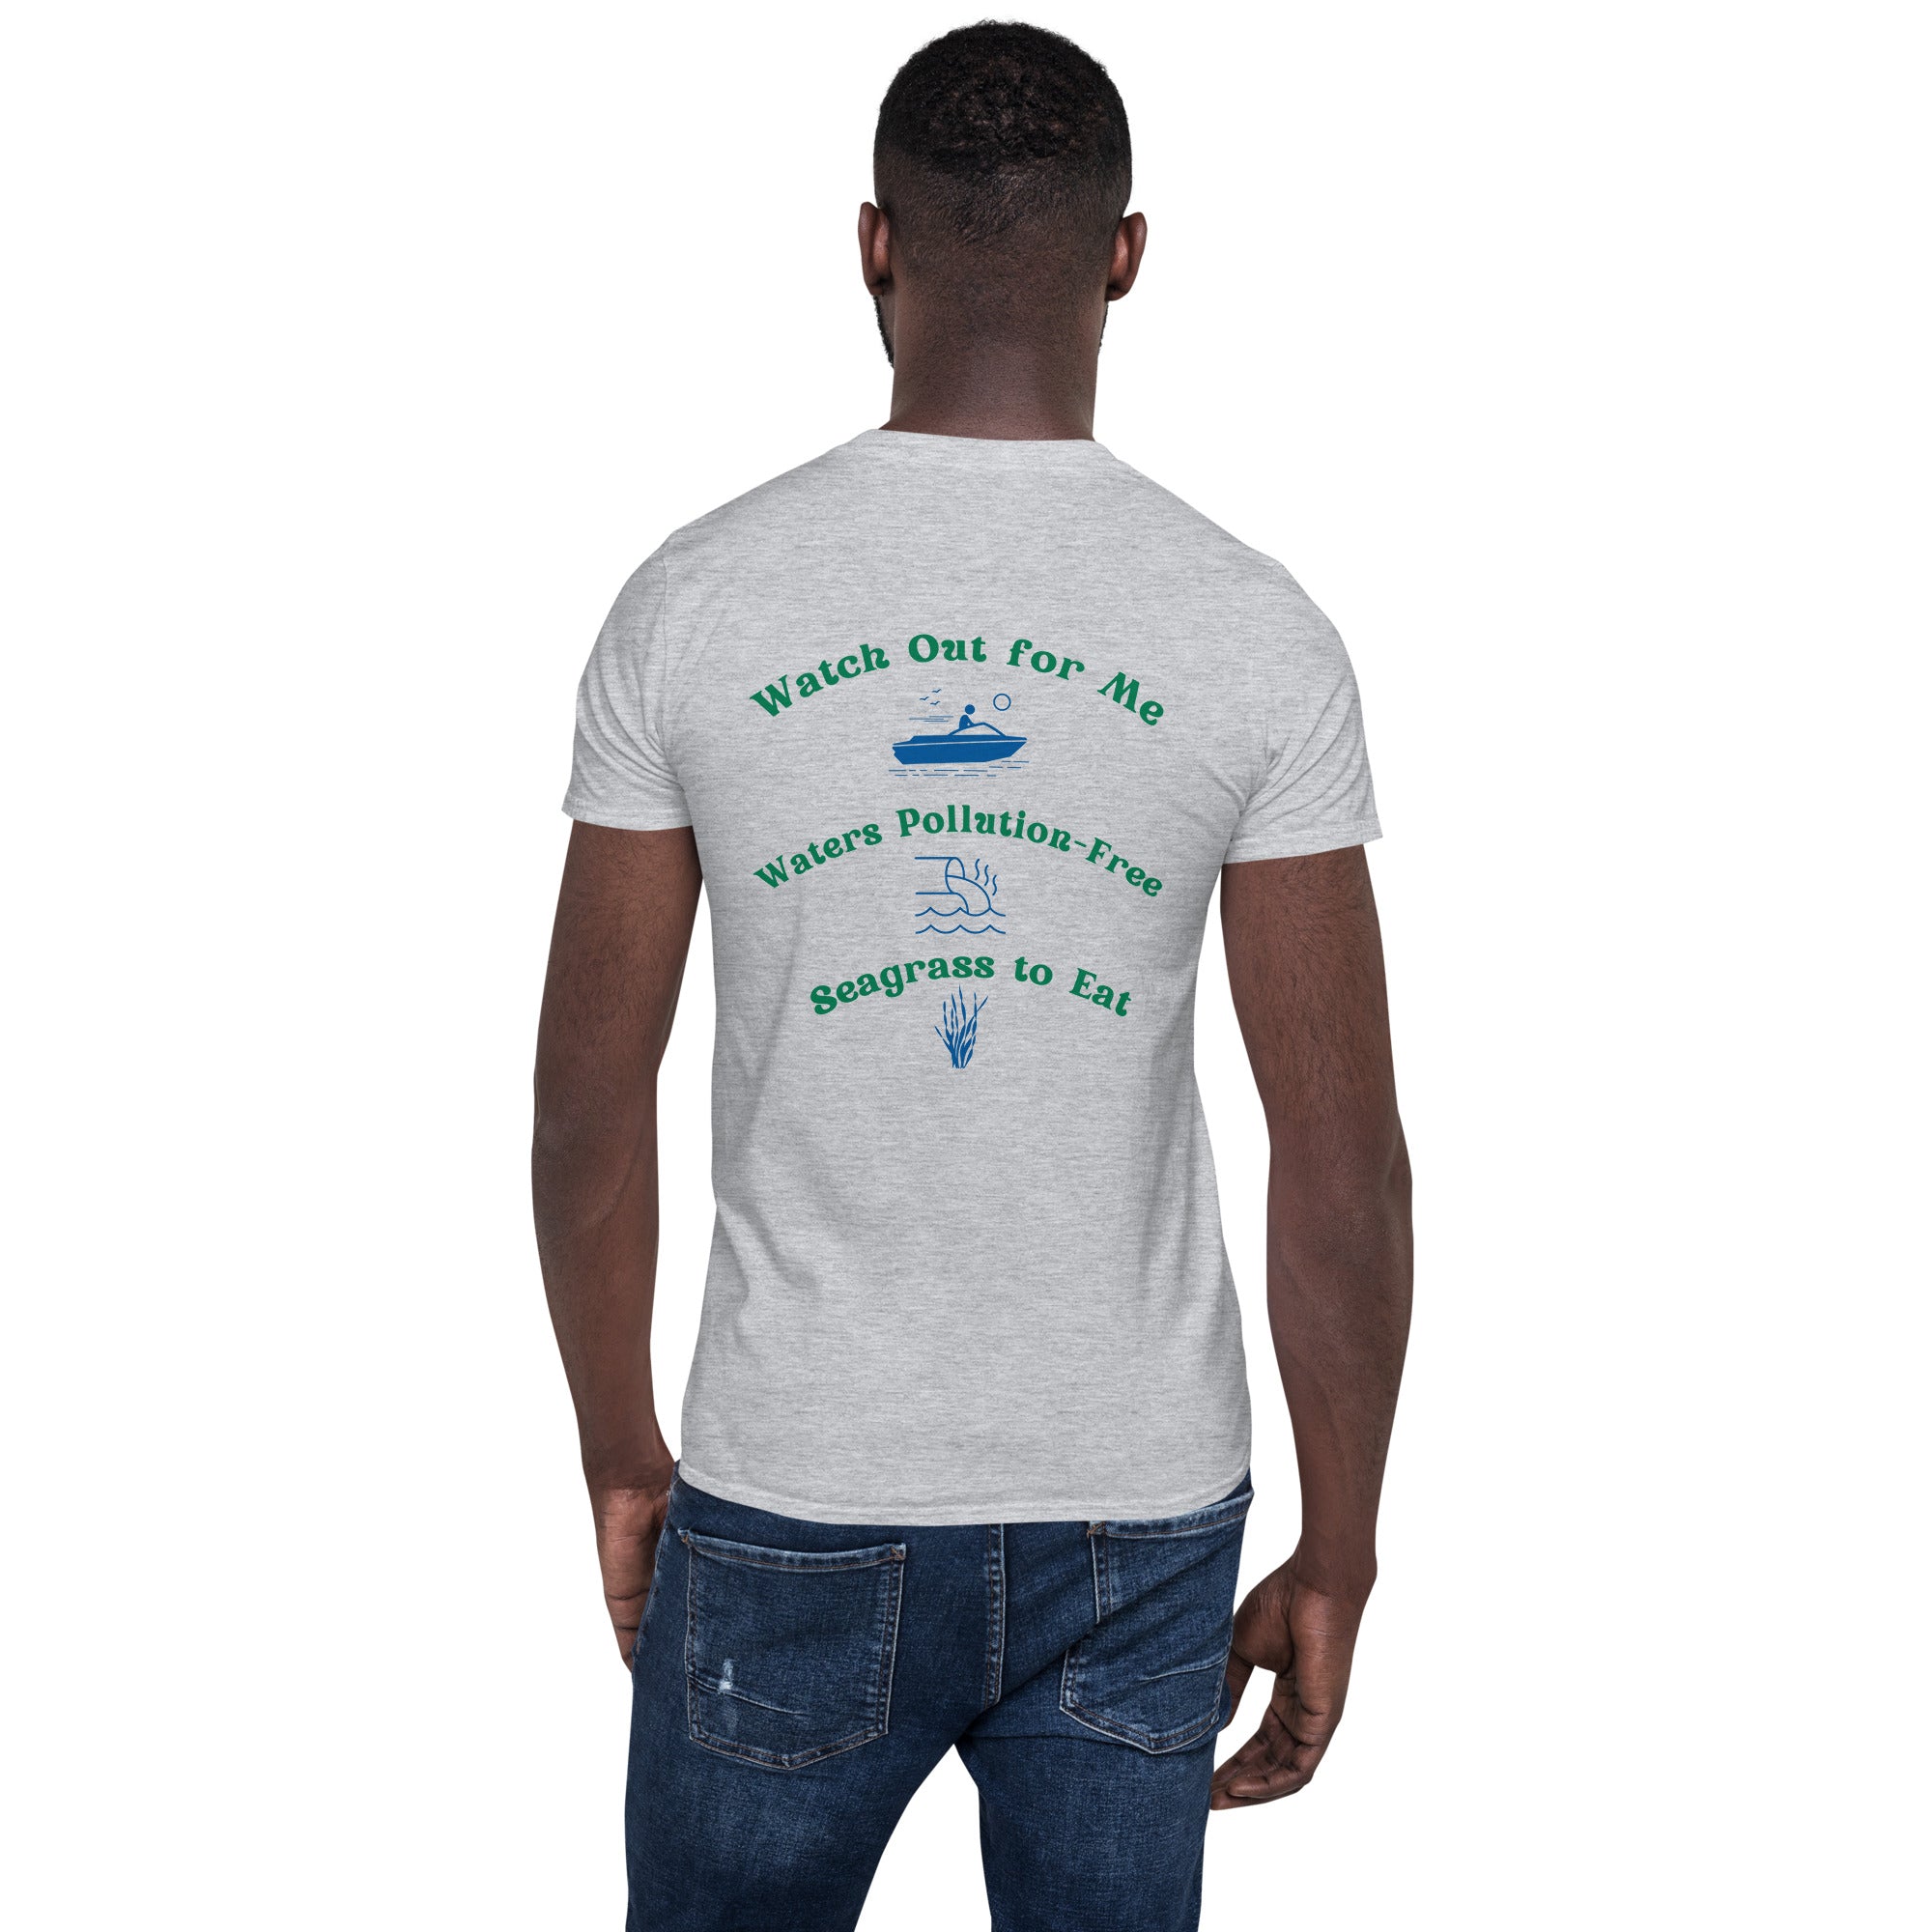 Protect the Manatees Short-Sleeve Unisex Graphic T-Shirt